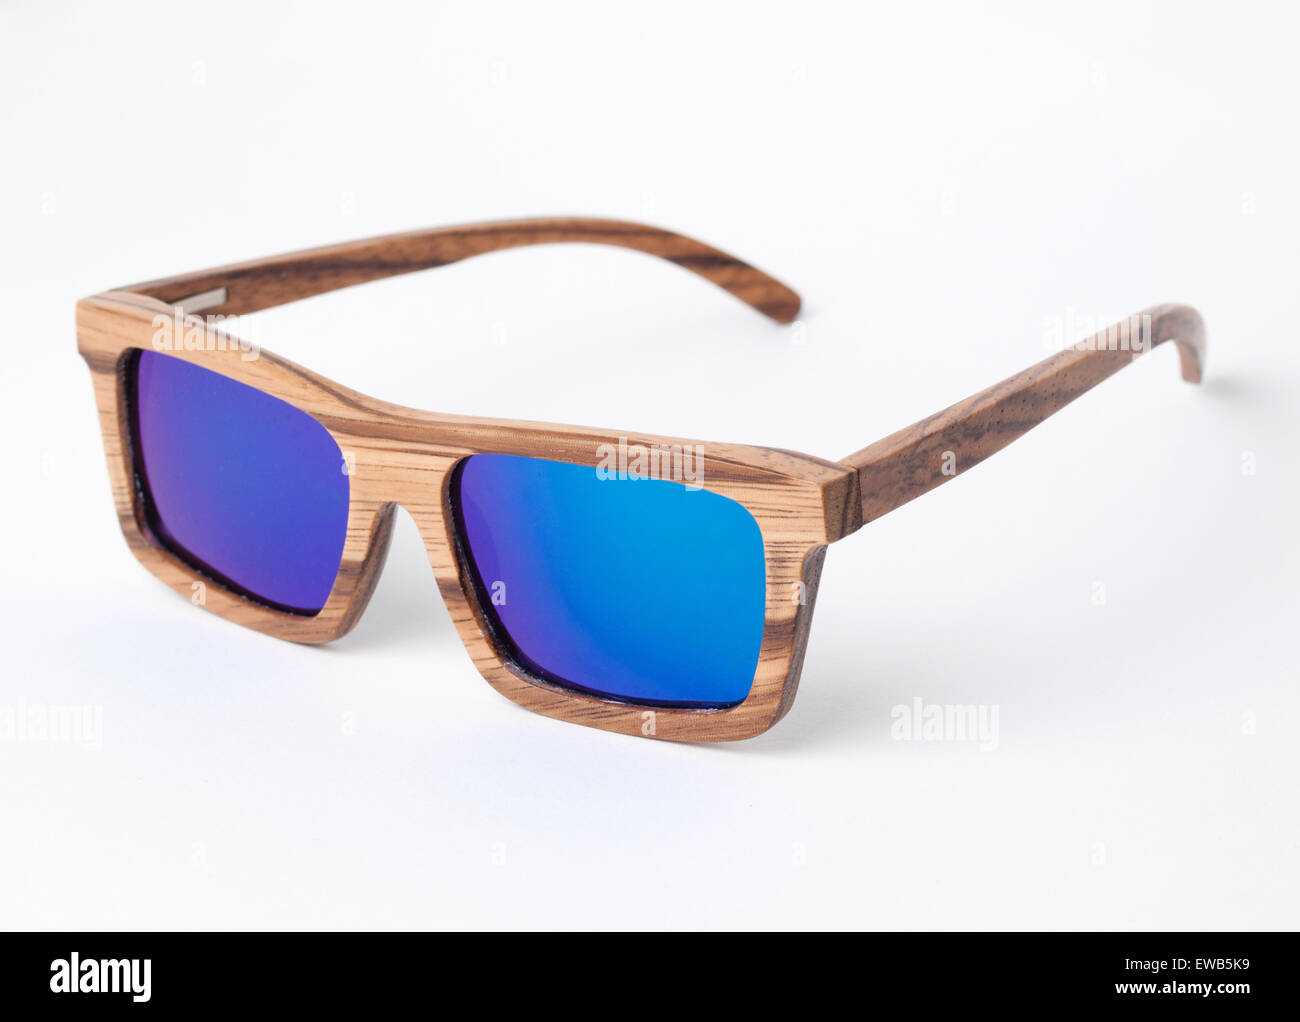 Wooden sunglasses isolated on white background in a studio shot. Stock Photo